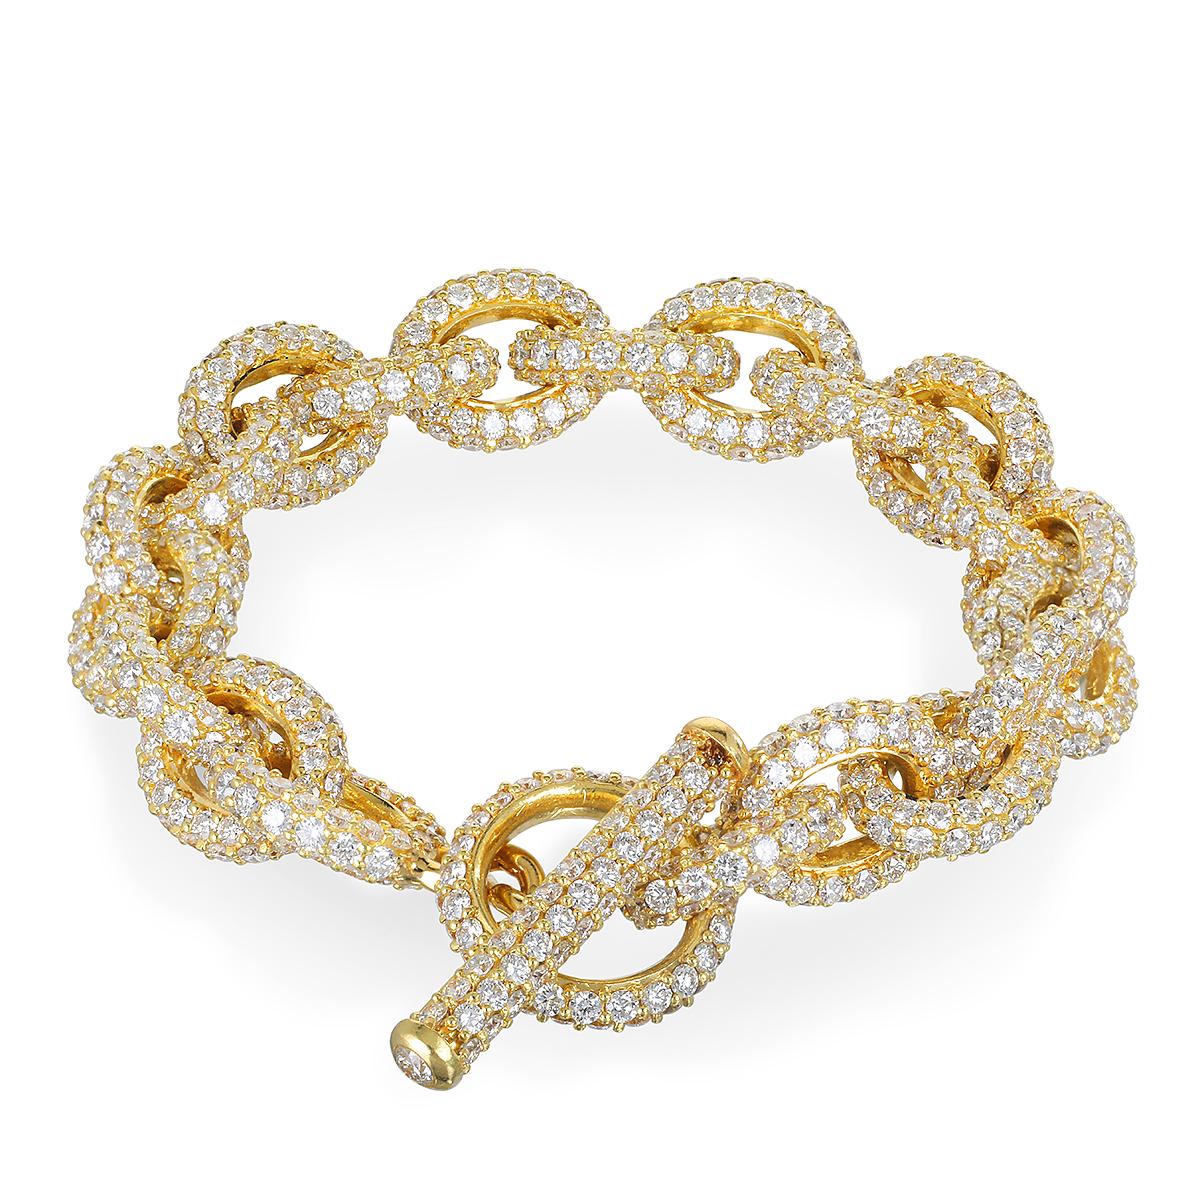 Faye Kim's 18 Karat Gold Diamond Link Bracelet with Toggle Closure is a stunner! Substantial handmade oval links and toggle are fully embellished with round, brilliant cut diamonds, providing sparkle from every angle. Diamonds combined with gold